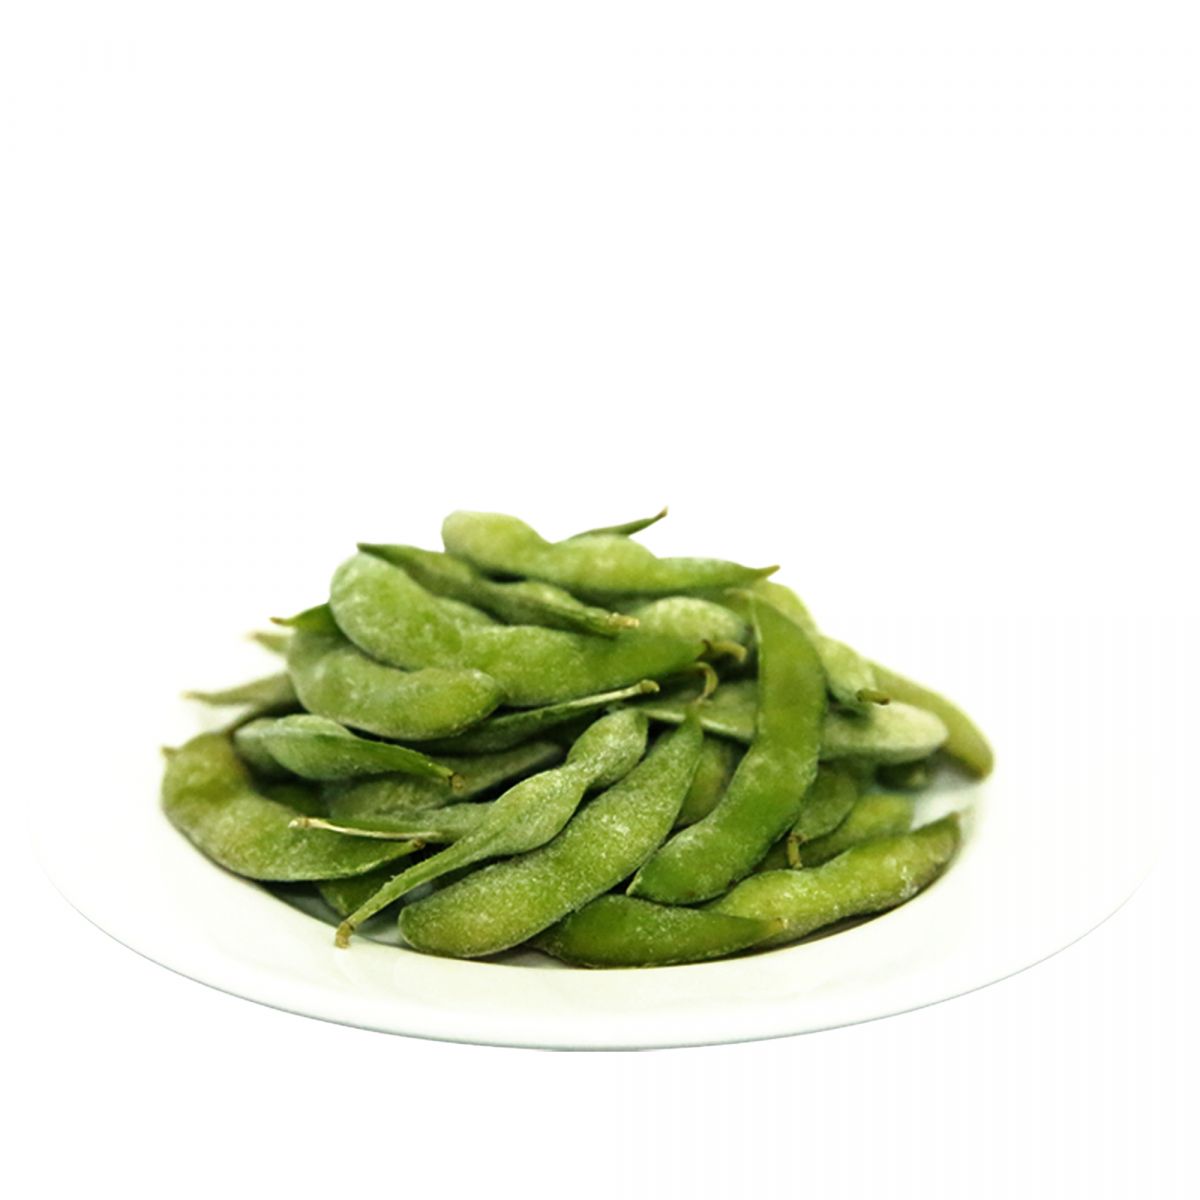 http://lavifood.com/en/products/blanching/edamame-beans